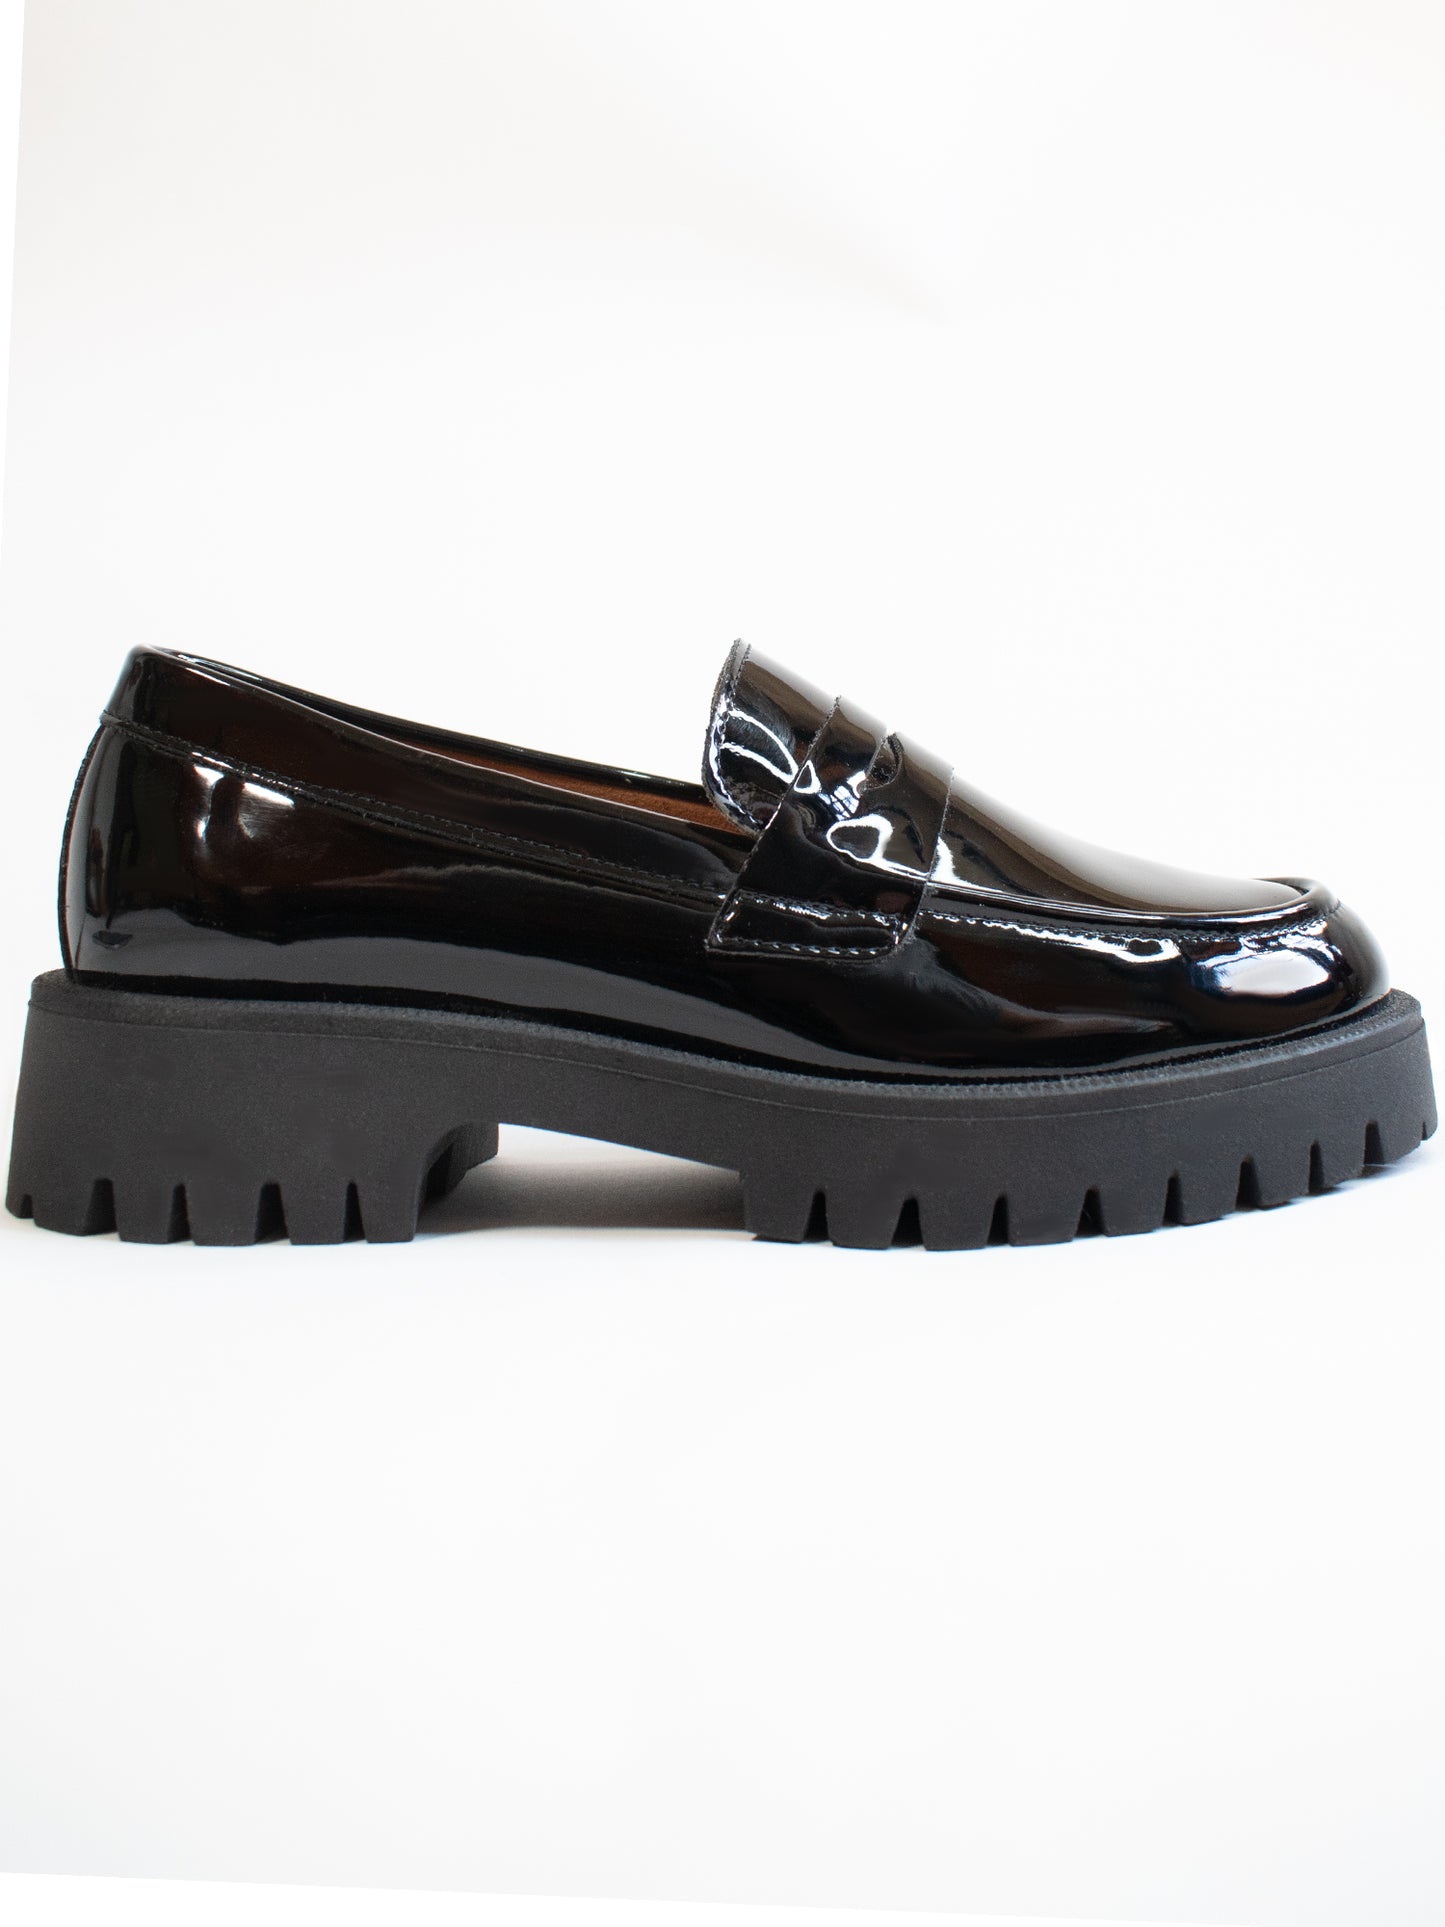 Gleissohle Penny Loafers